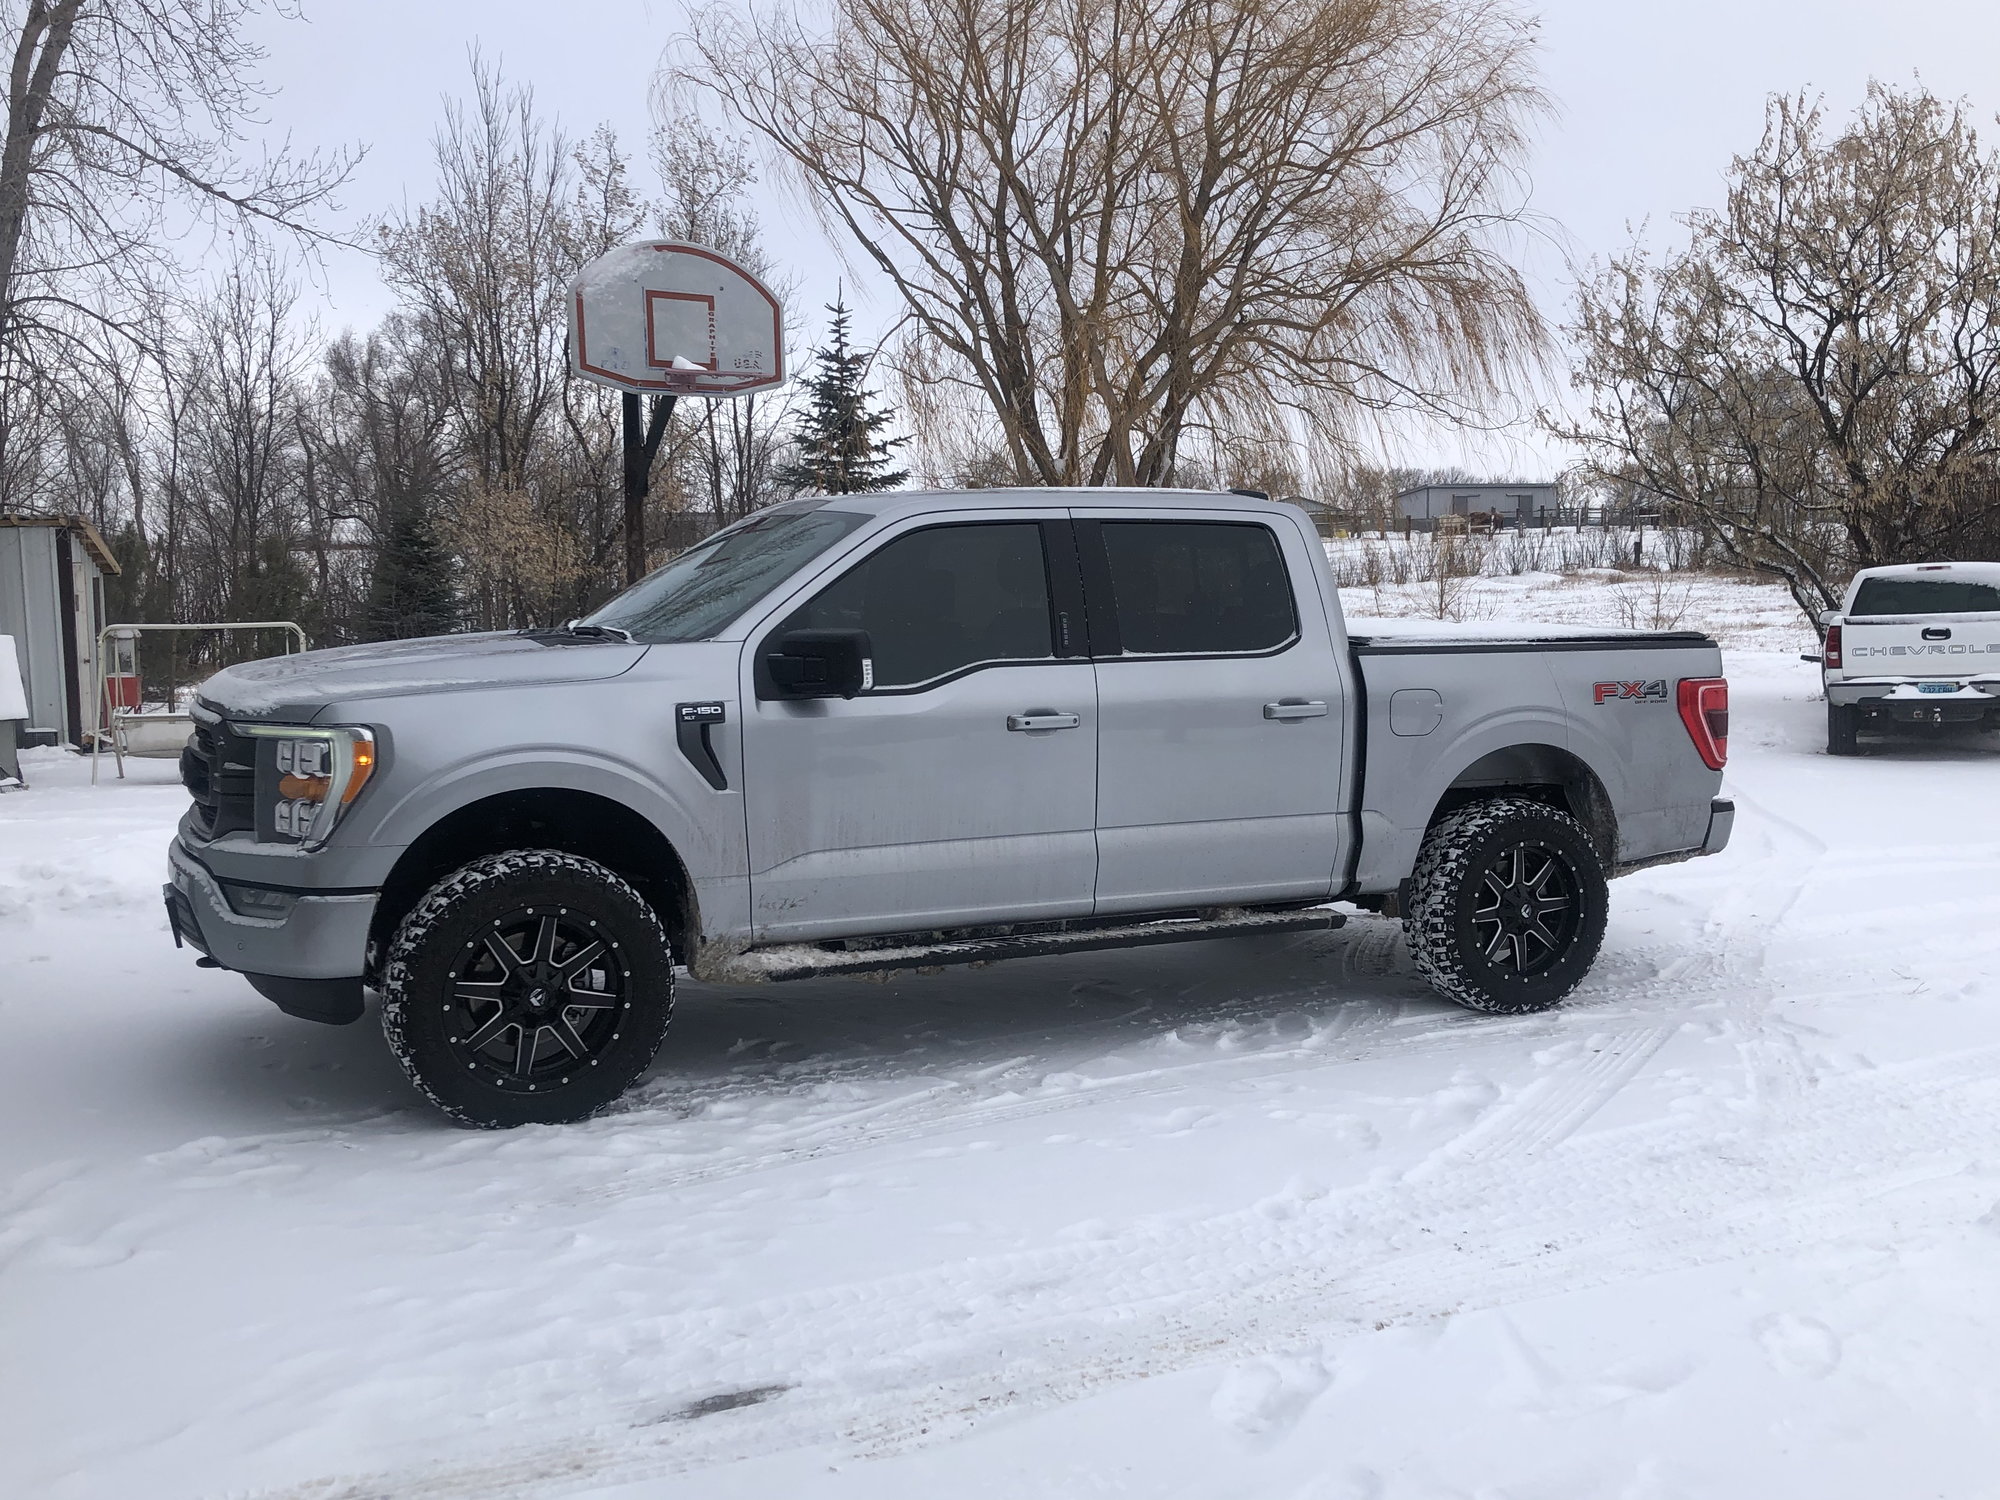 2021 Leveling Kits - Page 2 - Ford F150 Forum - Community of Ford Truck